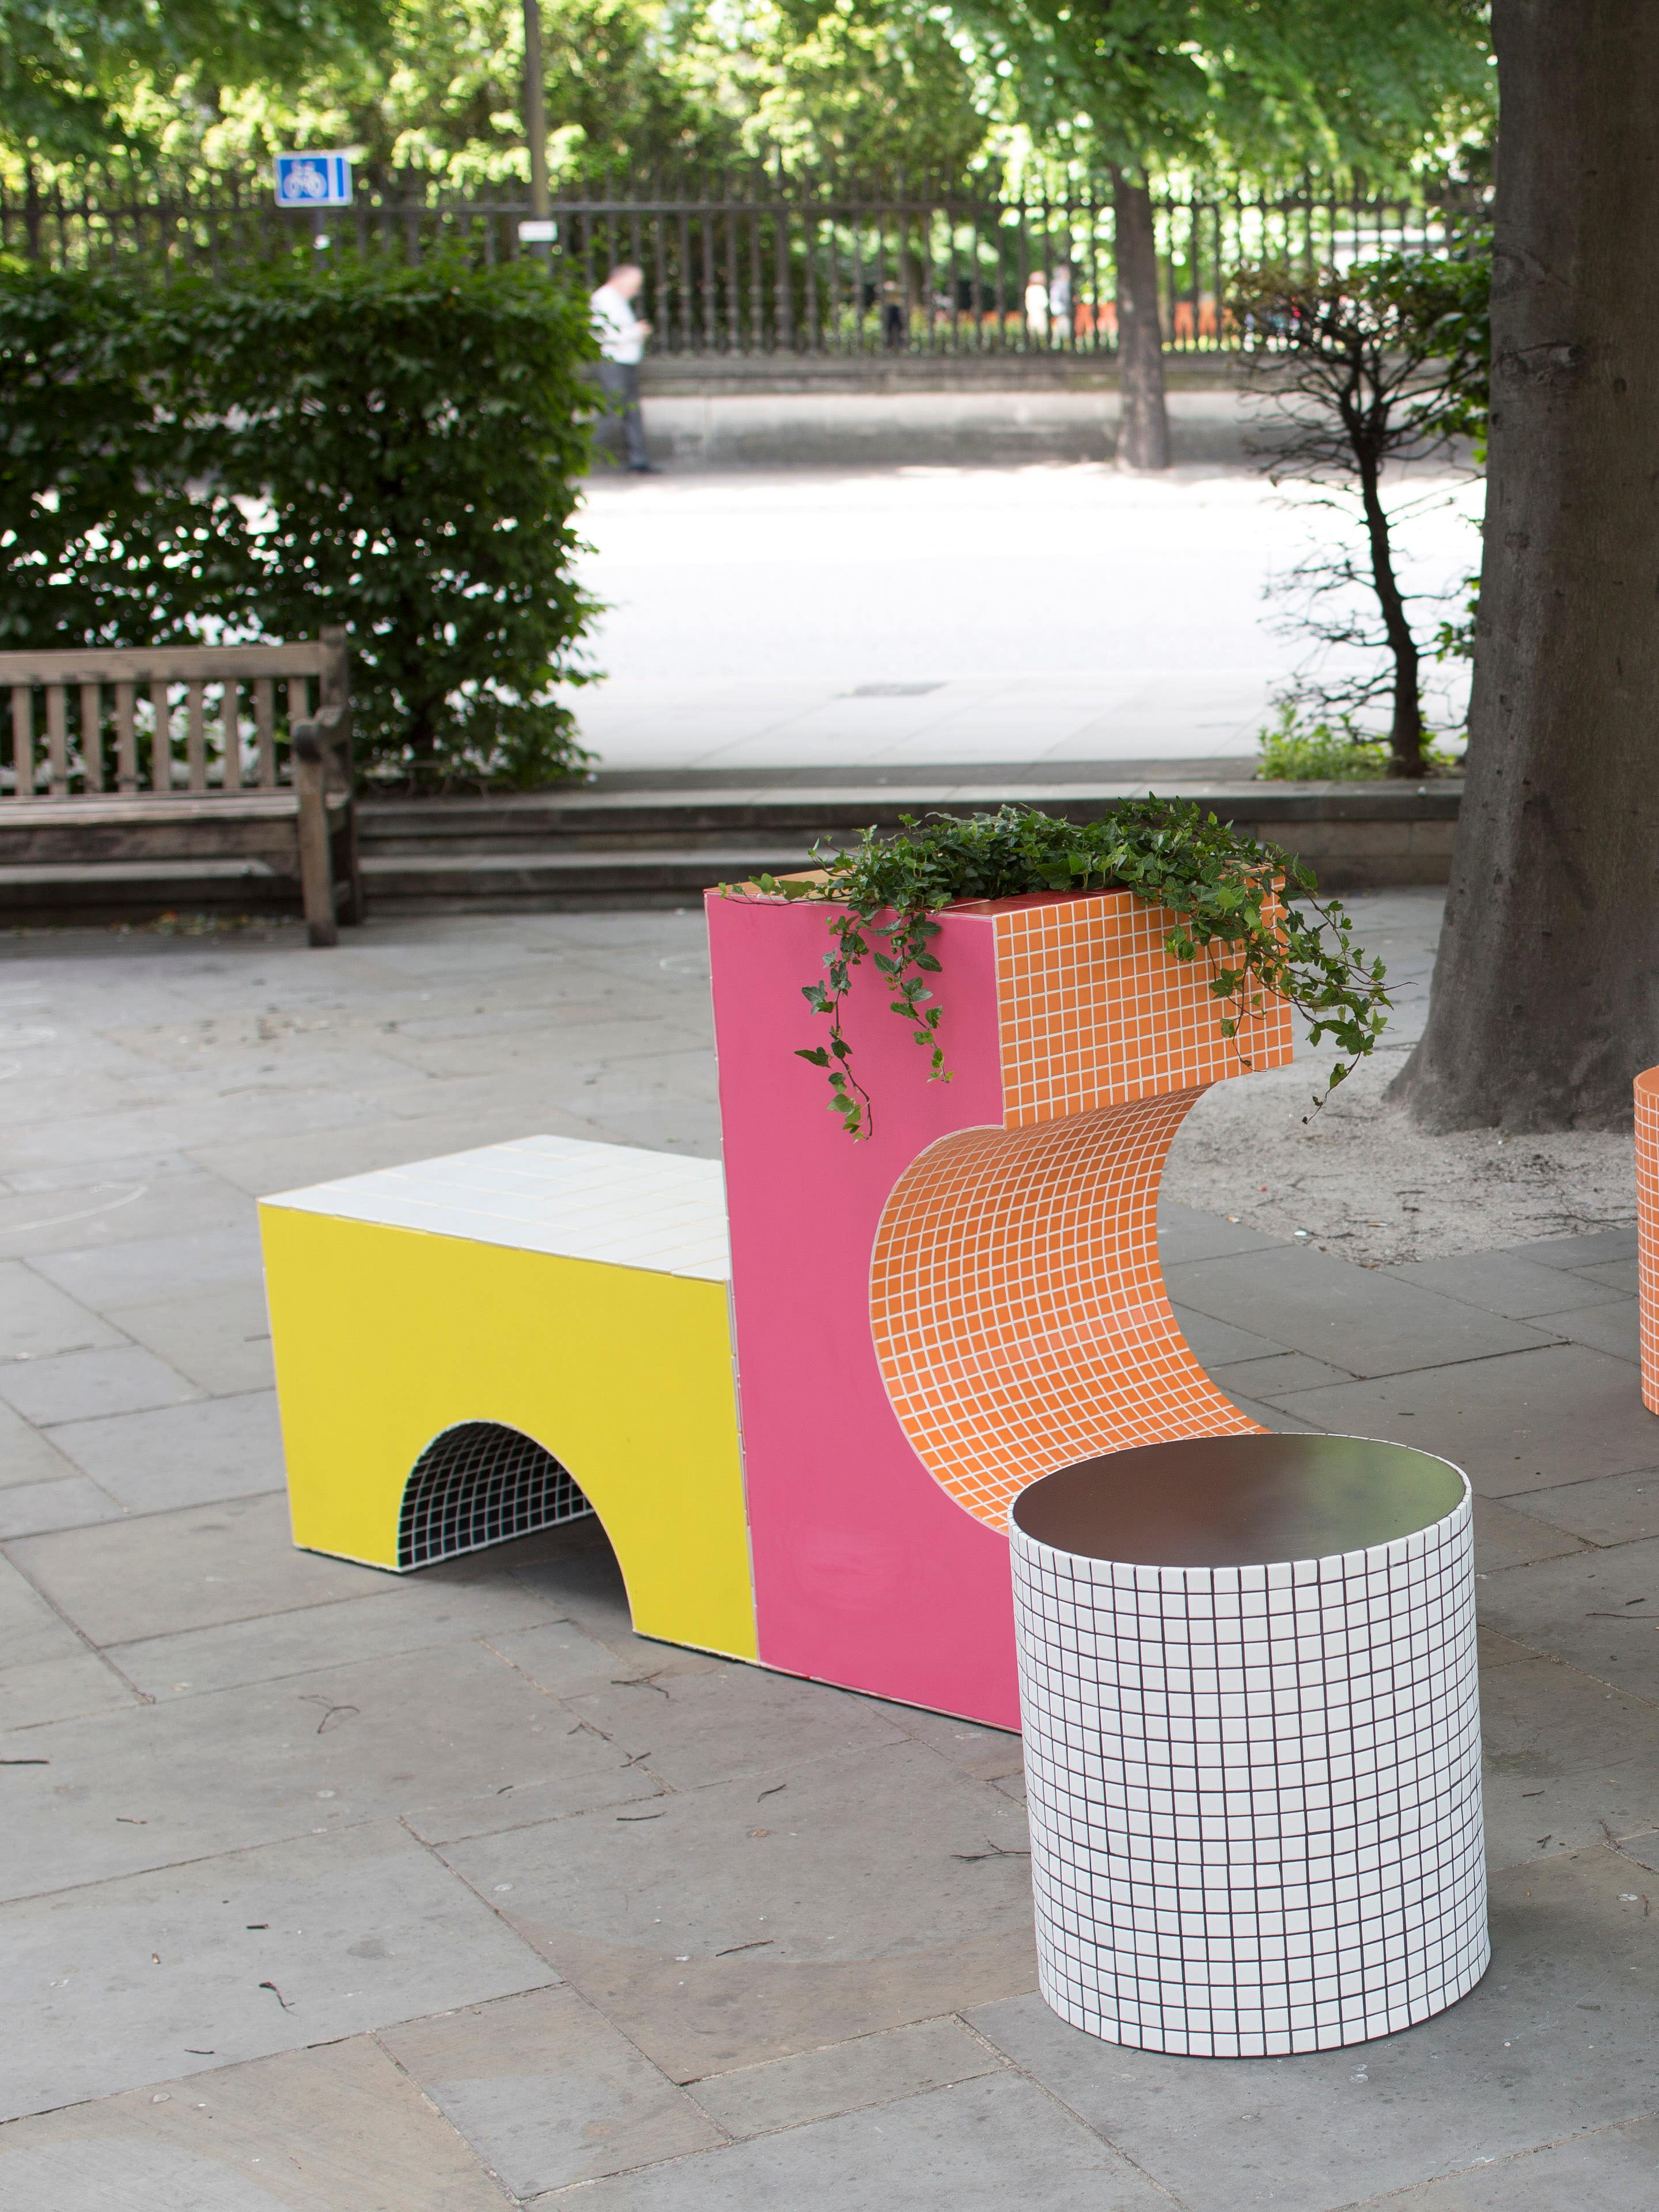 Friendly Suggestion From London: We Need More Colorful Public Benches